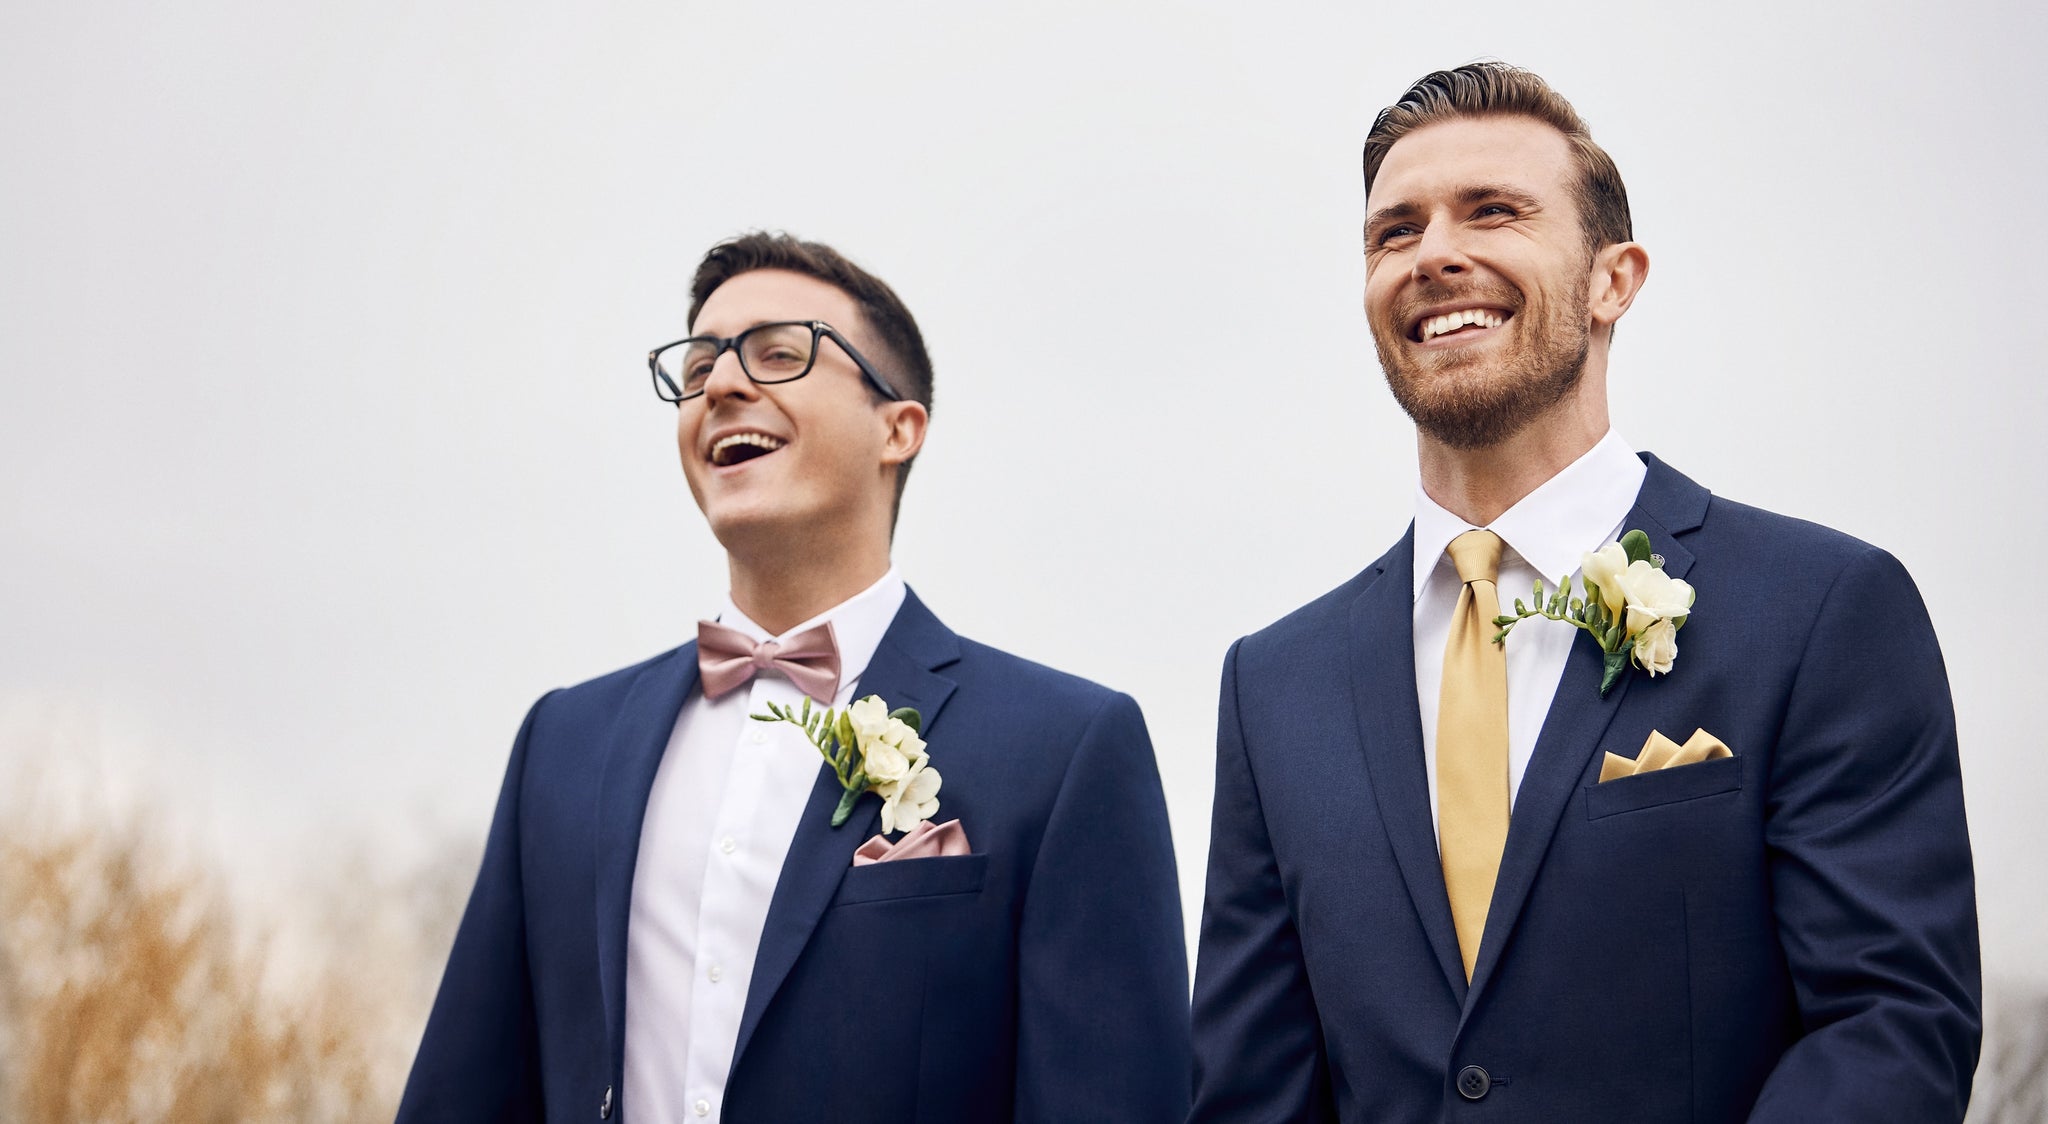 Best Fall Menswear For Wedding Guests | A Style Guide